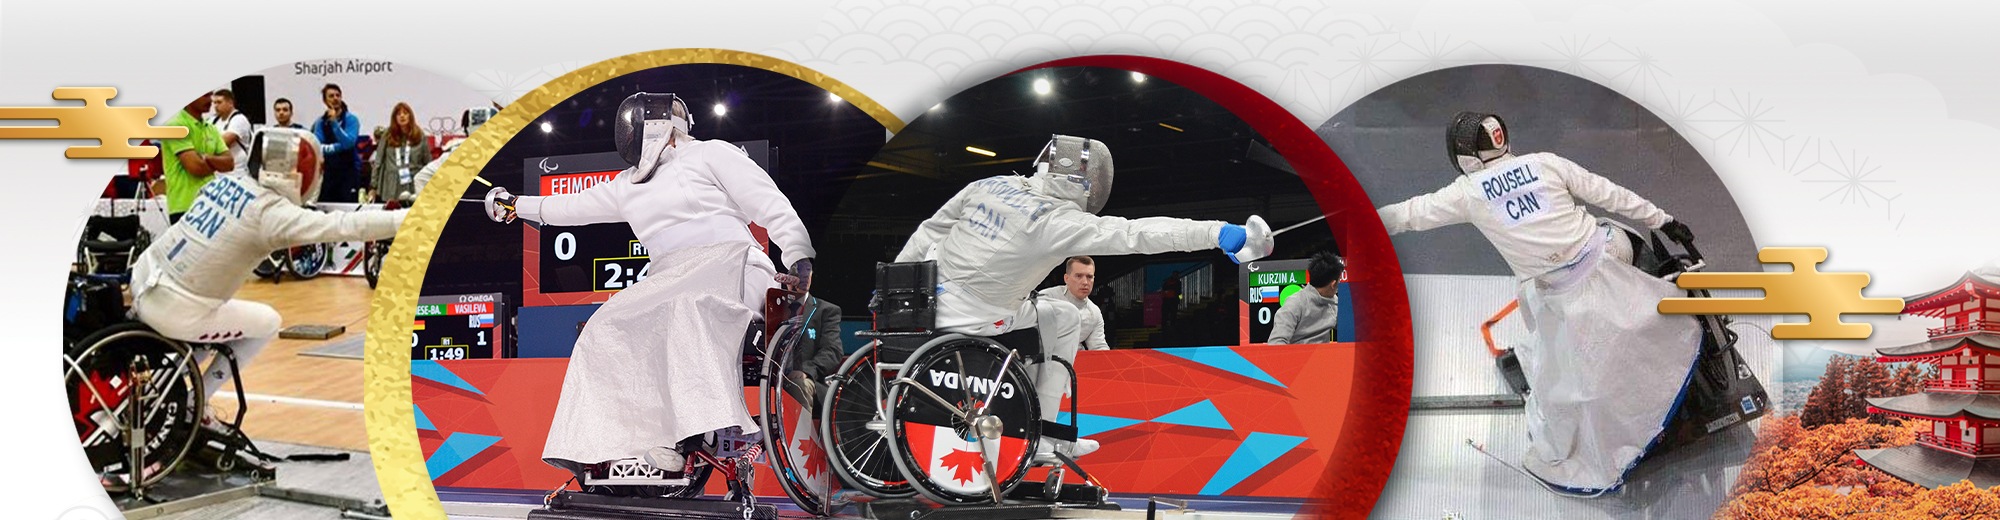 Wheelchair fencers on a Tokyo inspired background